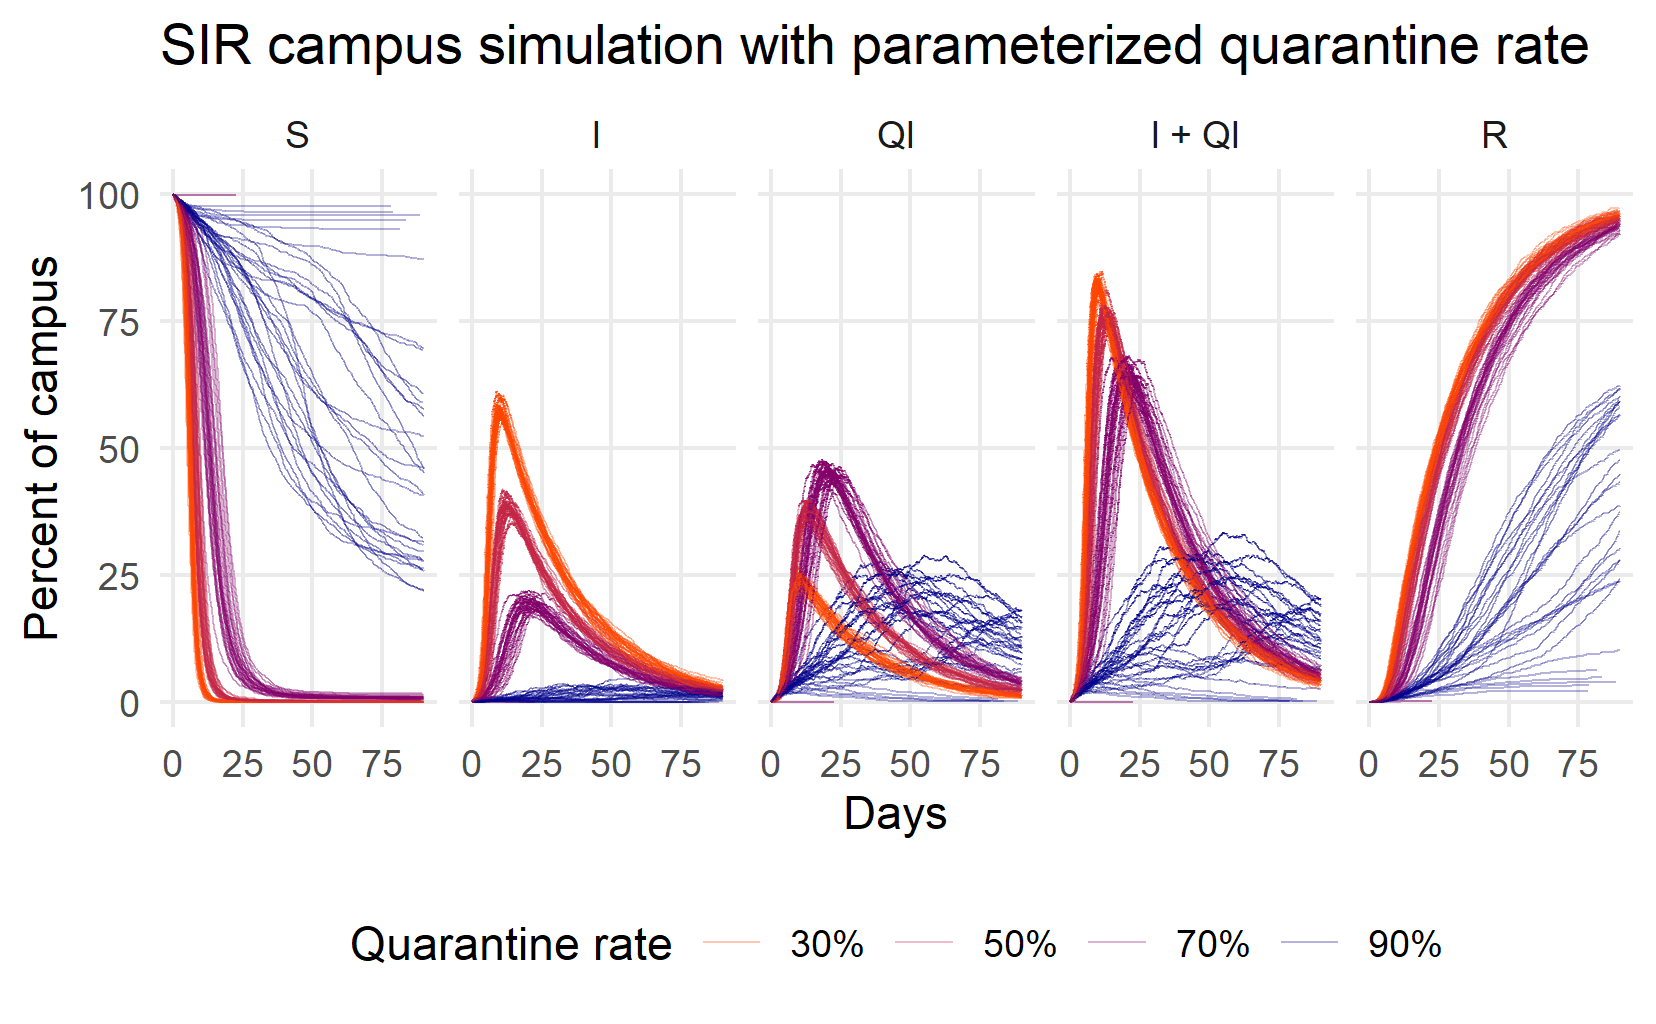 Simulating Susceptible (S), Infected but not qurantined (I), Quarantined (Q), all infected (Q+I), and Recovered (R) individuals while varying the proportion of infected successfully quarantined